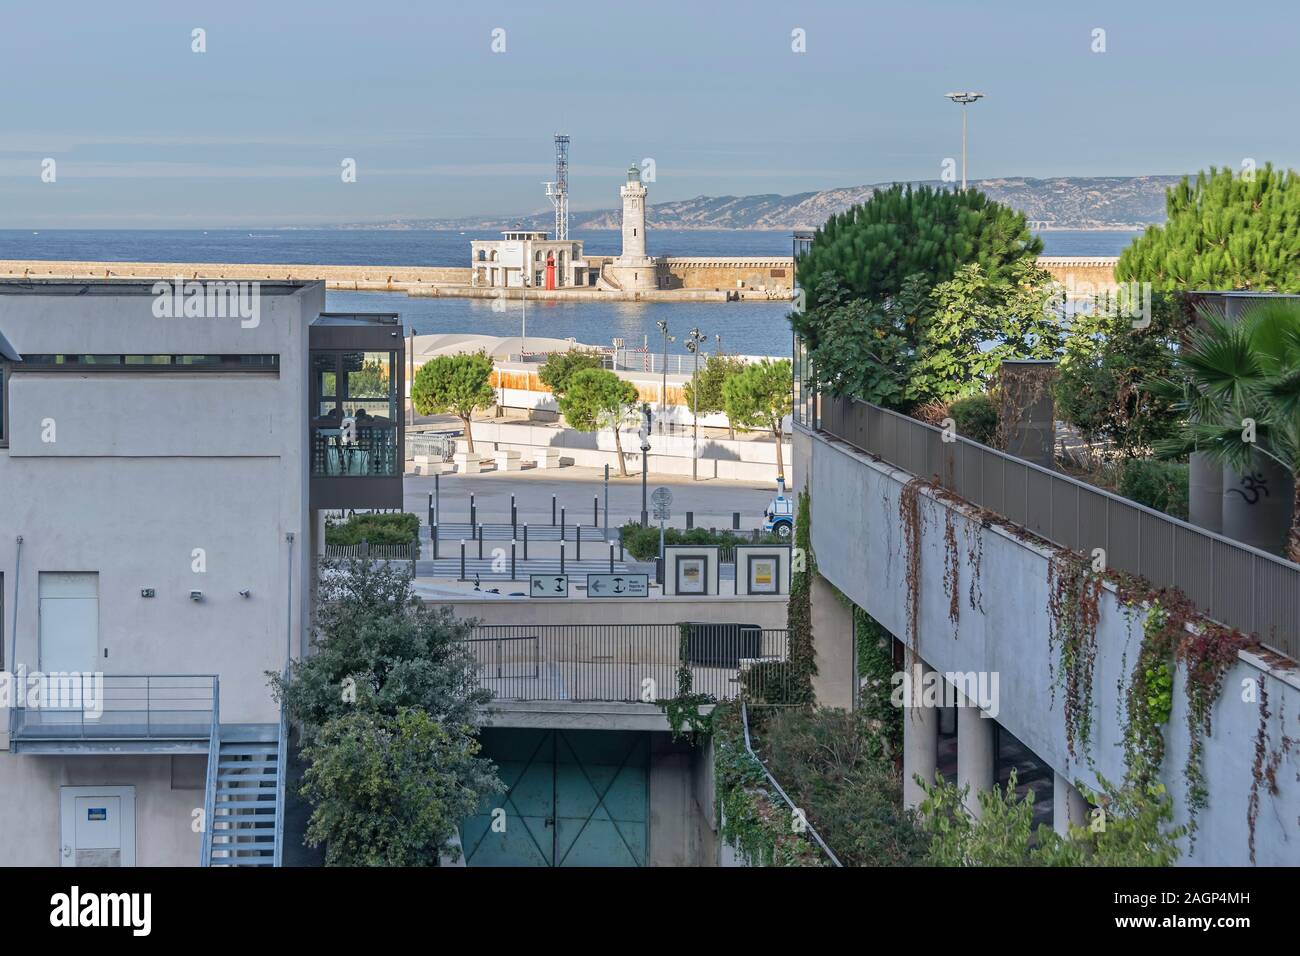 Marseille, France - November 1, 2019: View over the underpass Esplanade de la Tourette at the entrance to the Old Port with the lighthouse Saint Marie Stock Photo